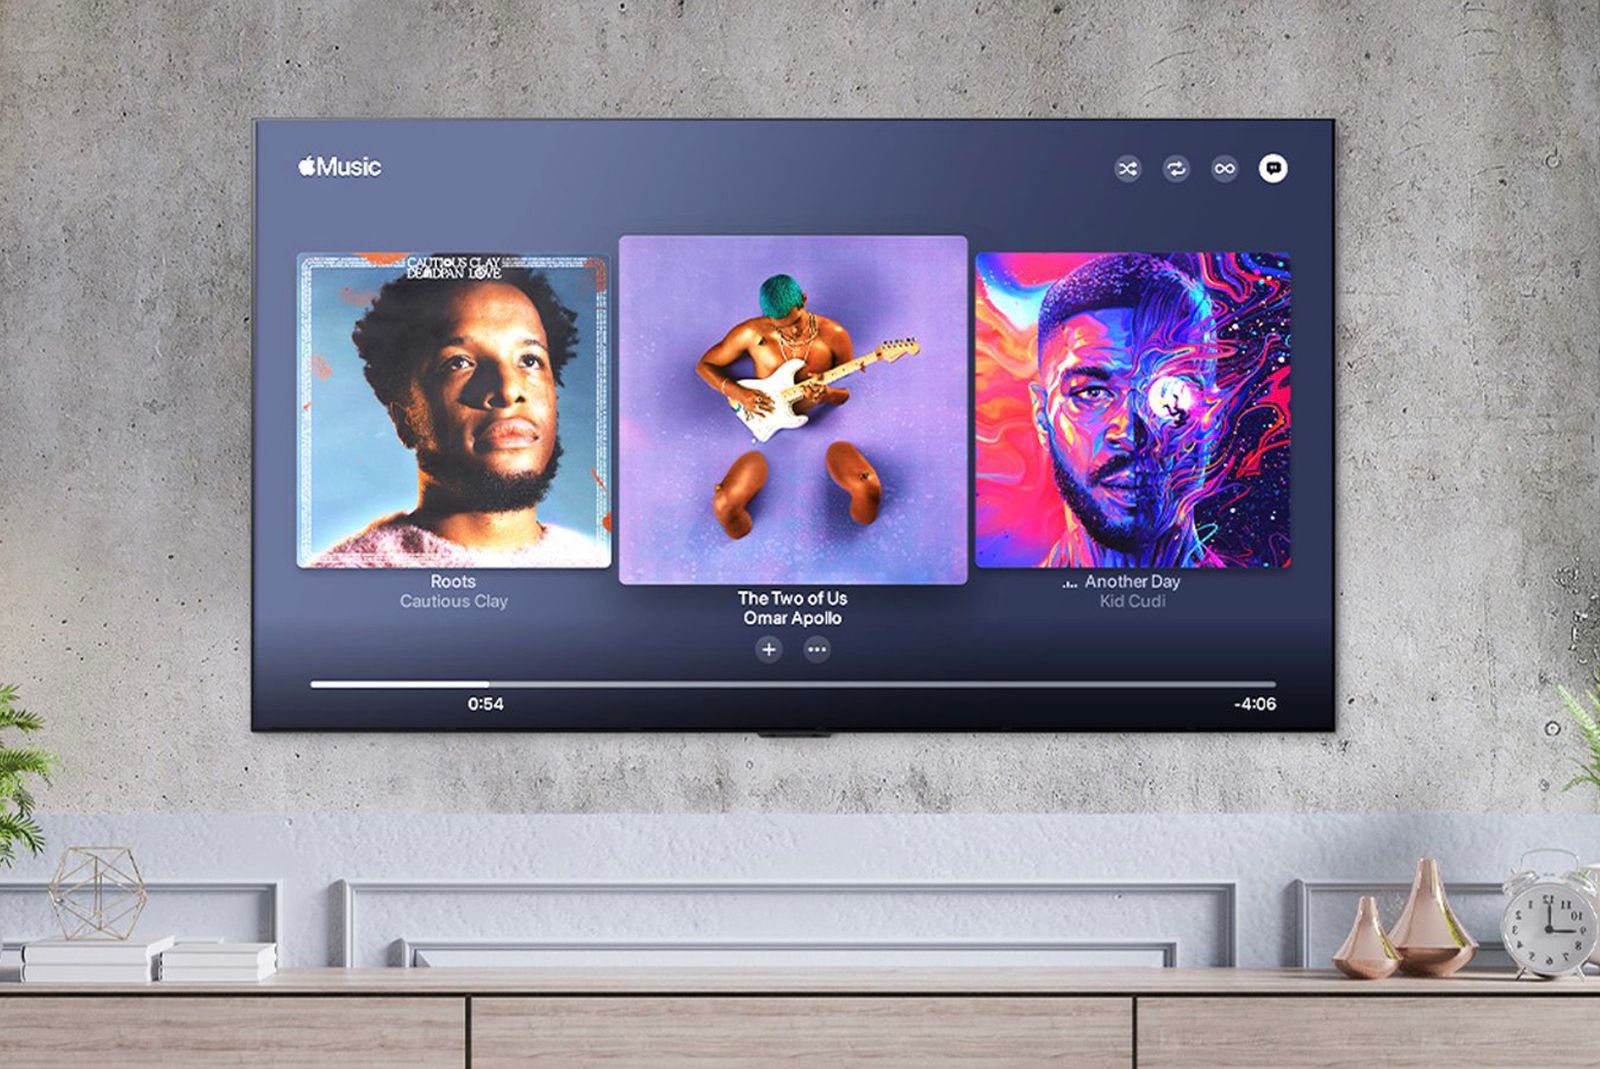 The Apple Music app is finally available on LG smart TVs photo 1